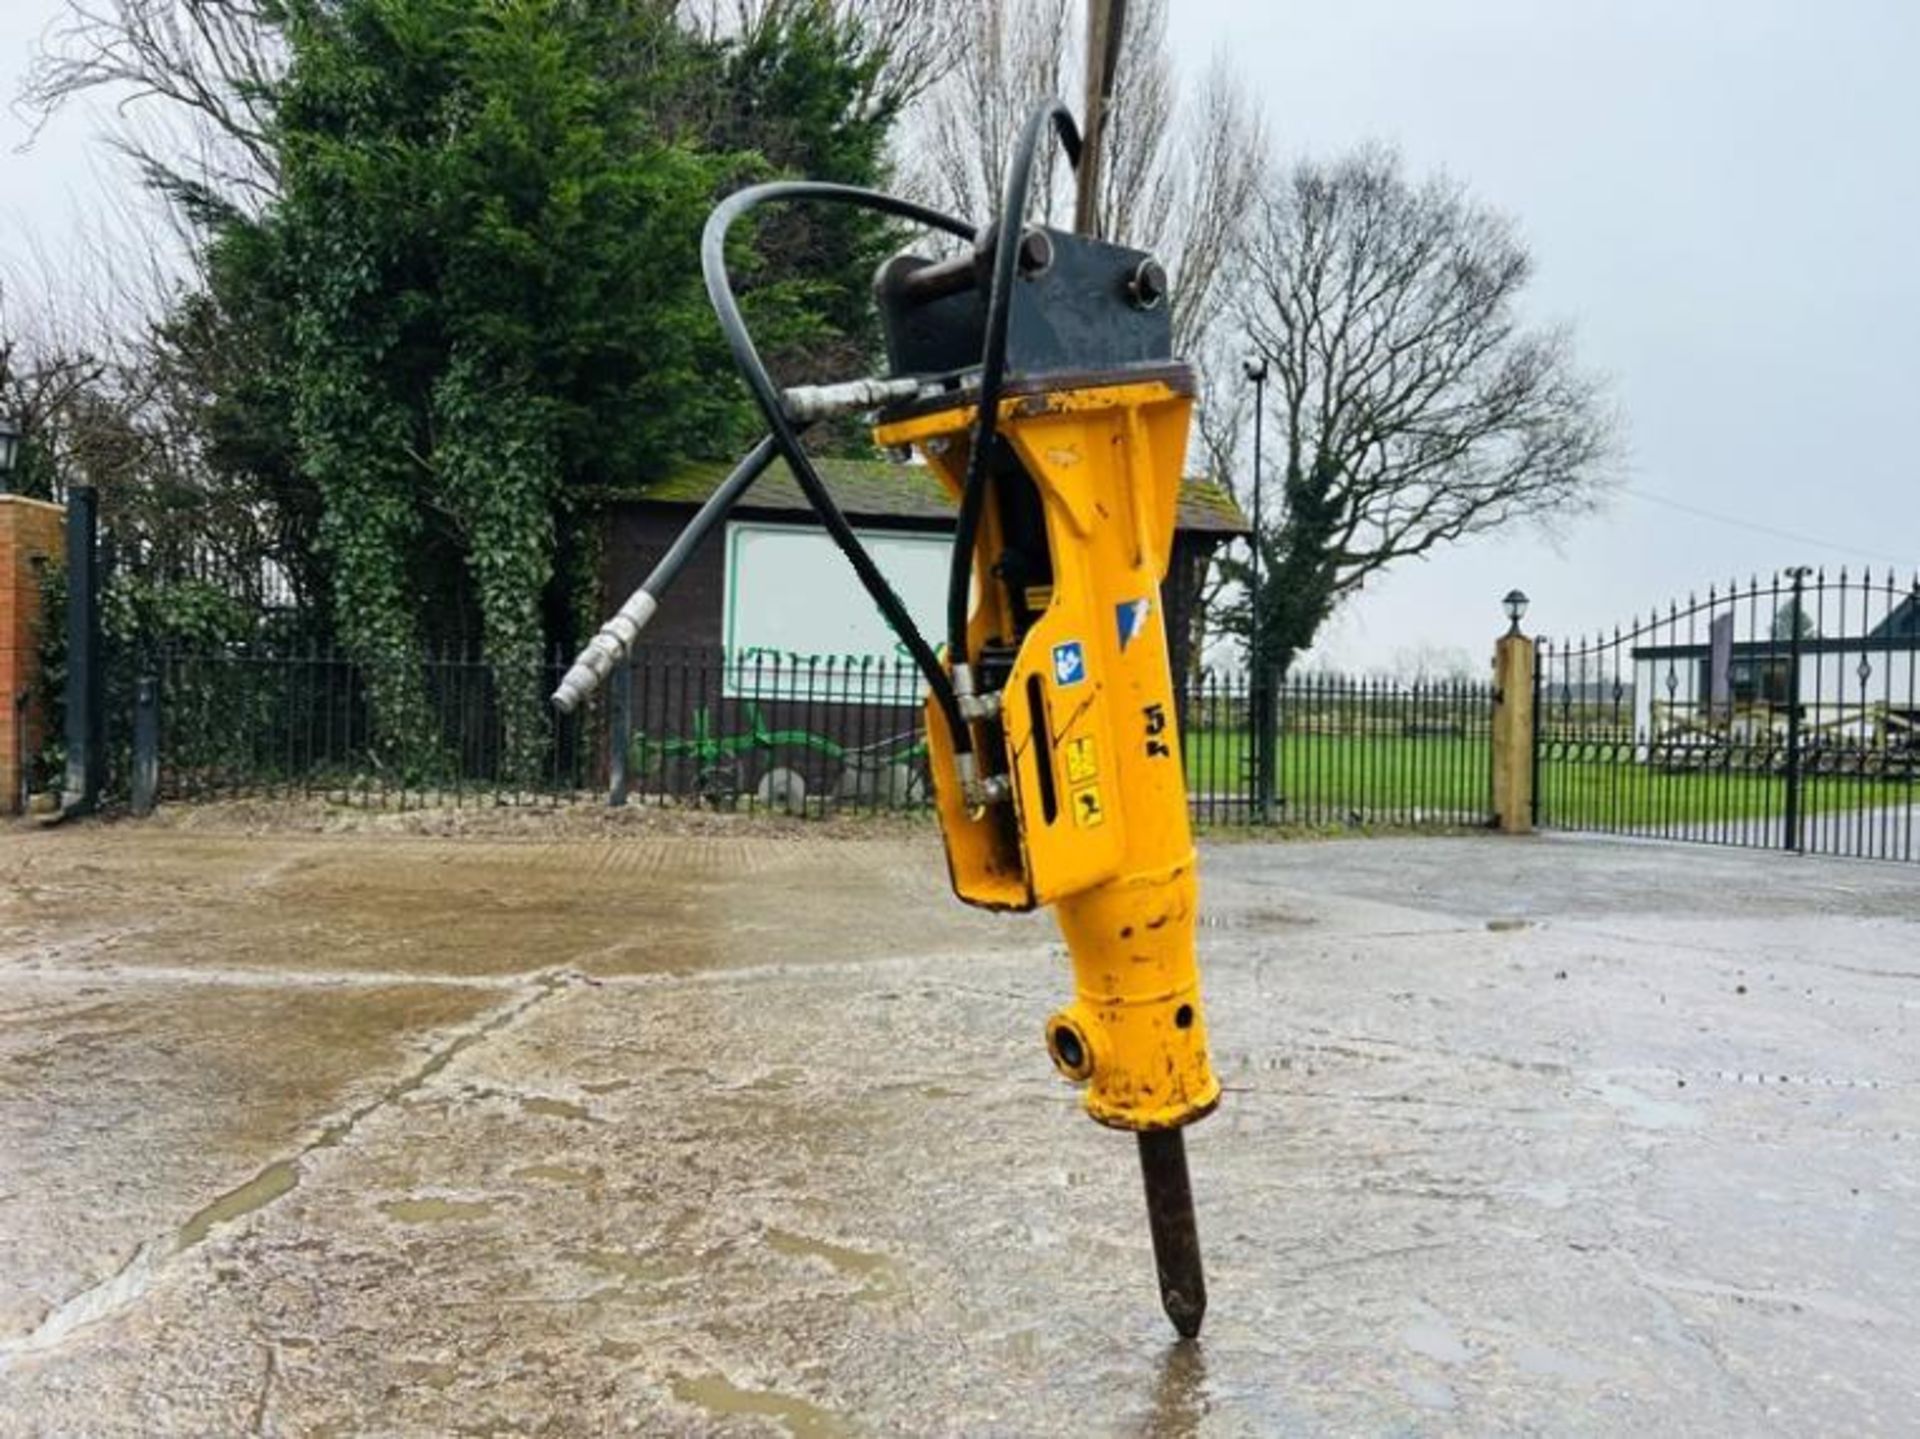 HYDRAULIC BREAKER TO SUIT 3 TON EXCAVATOR QUICK HITCH C/W PIPES